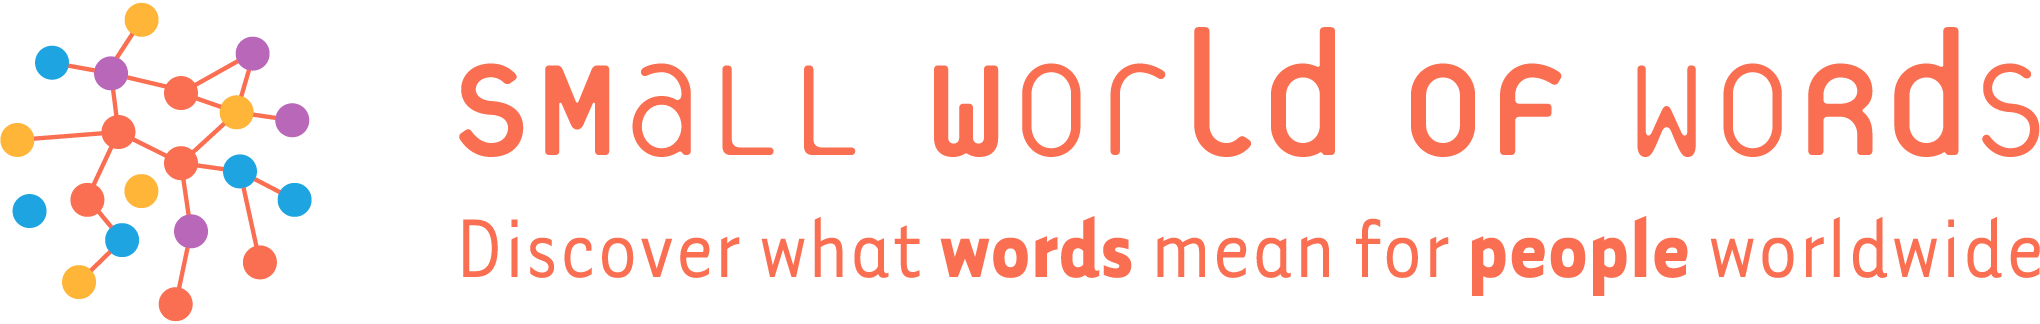 Small World of Words - Discover what words mean to people worldwide.